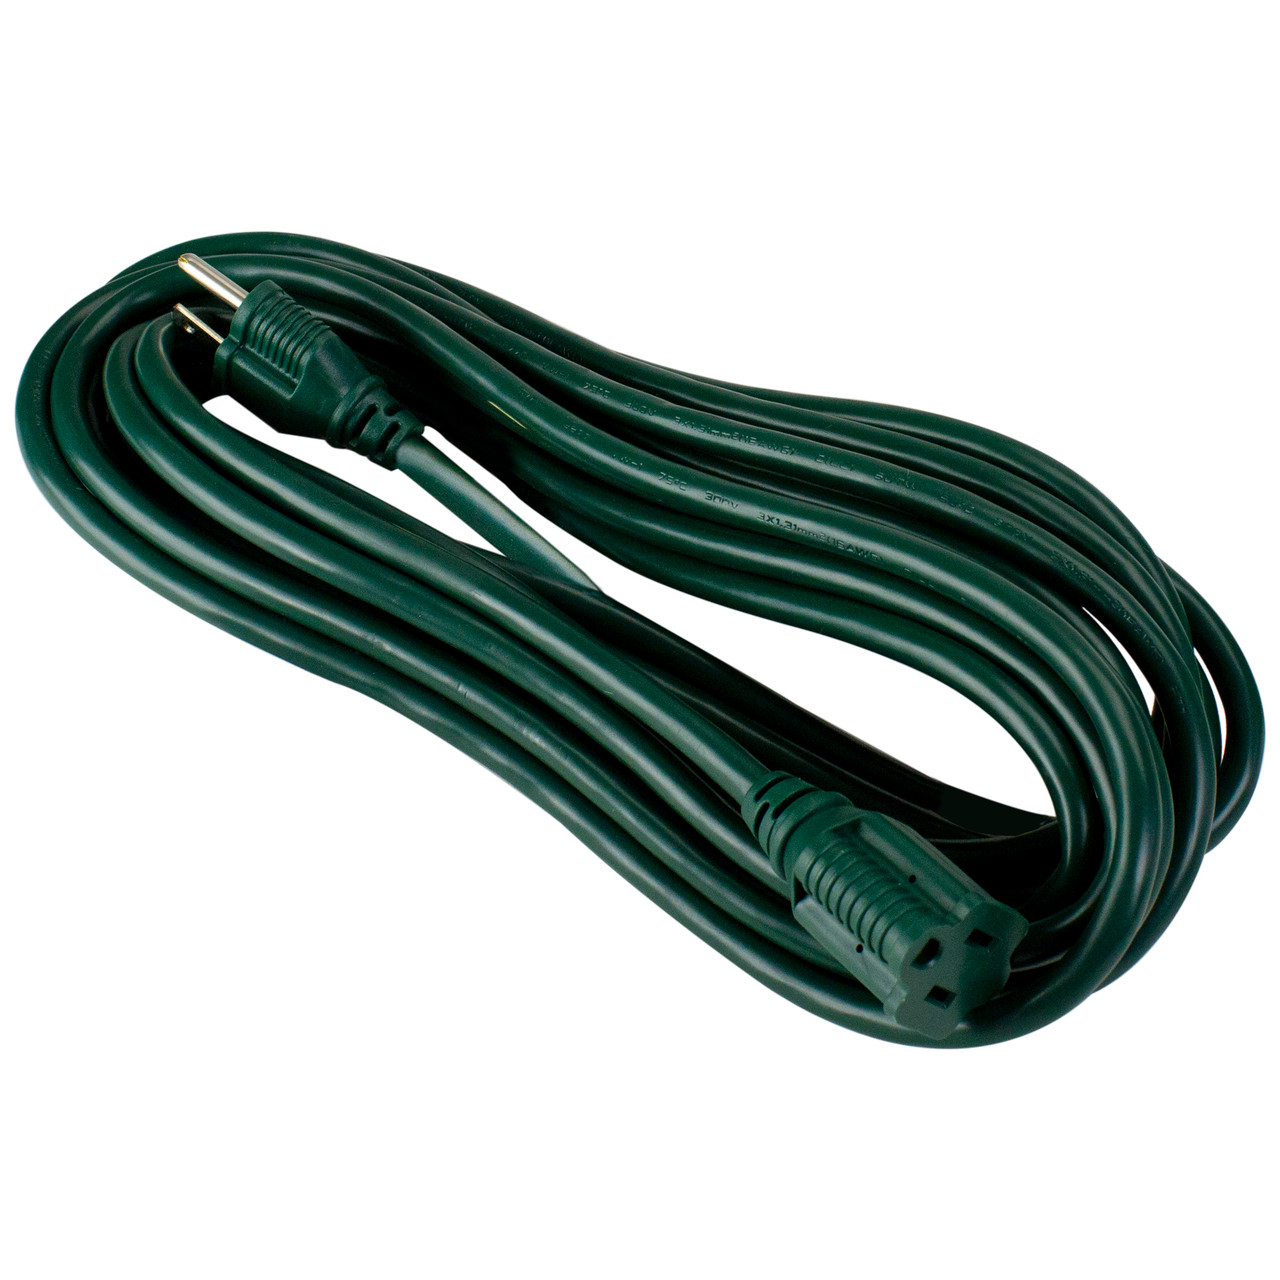 25ft Green 3-Prong Outdoor Extension Power Cord with Outlet Block